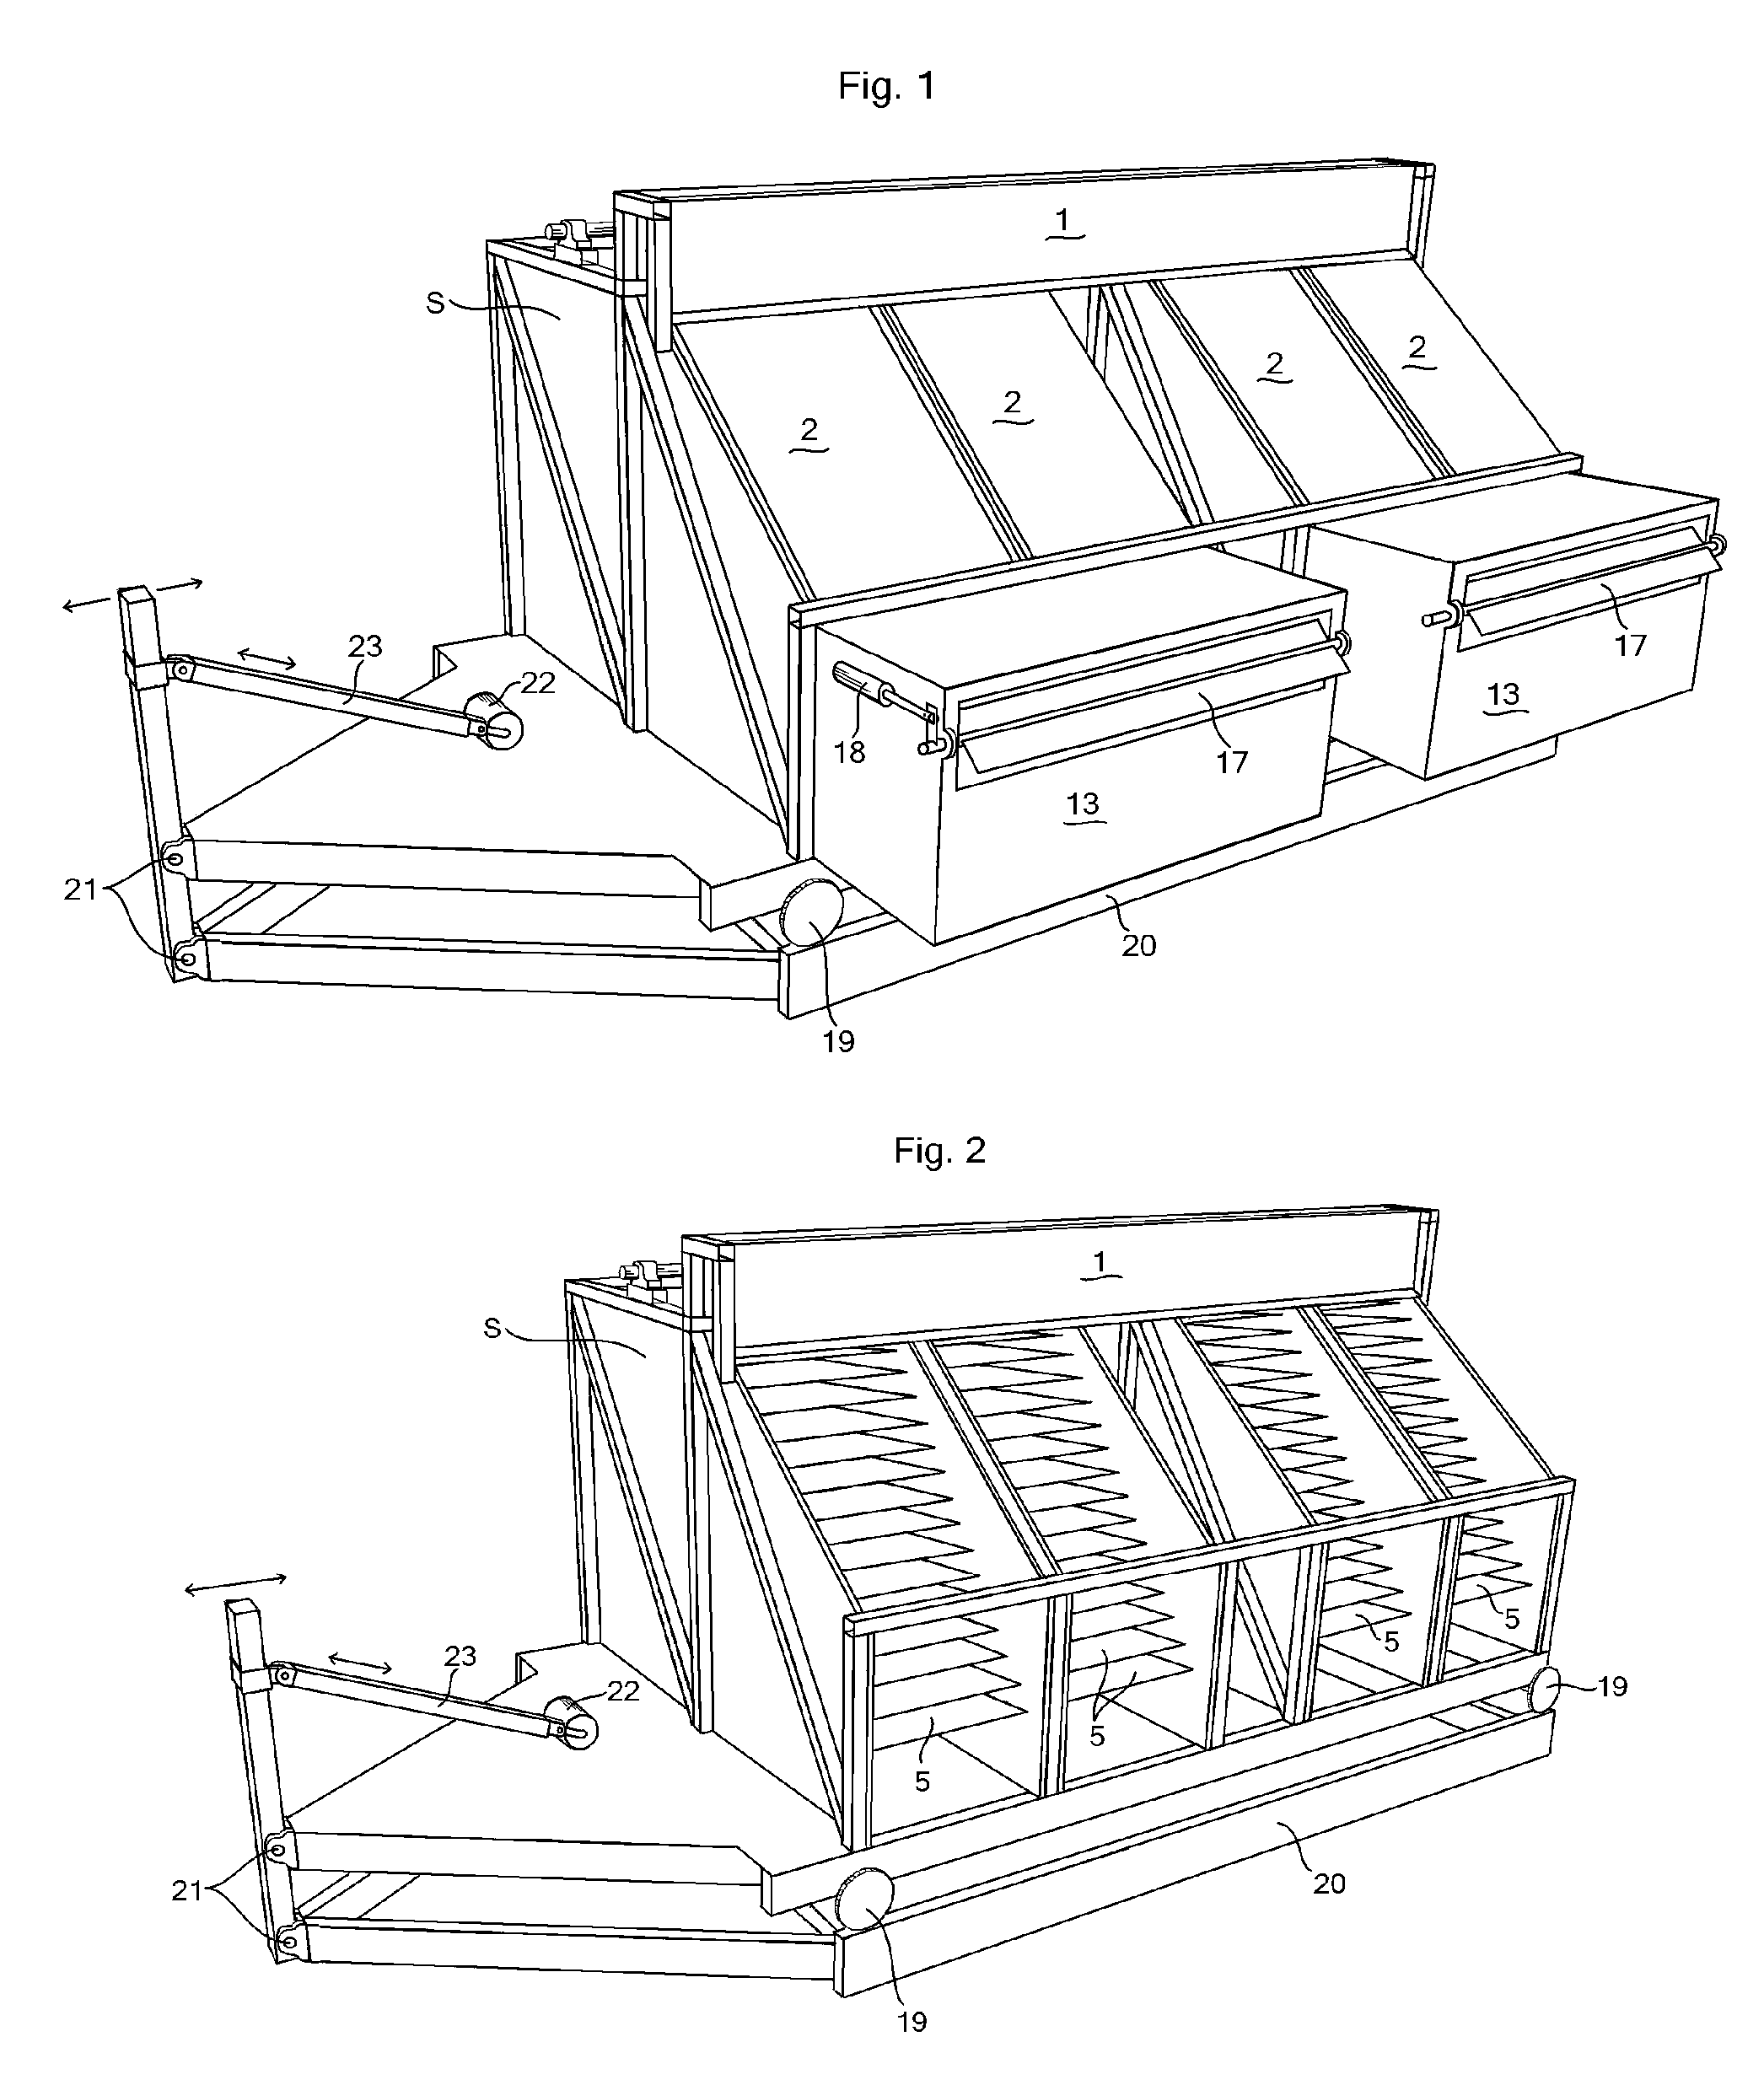 Method and Apparatus for Separating Oil Seeds